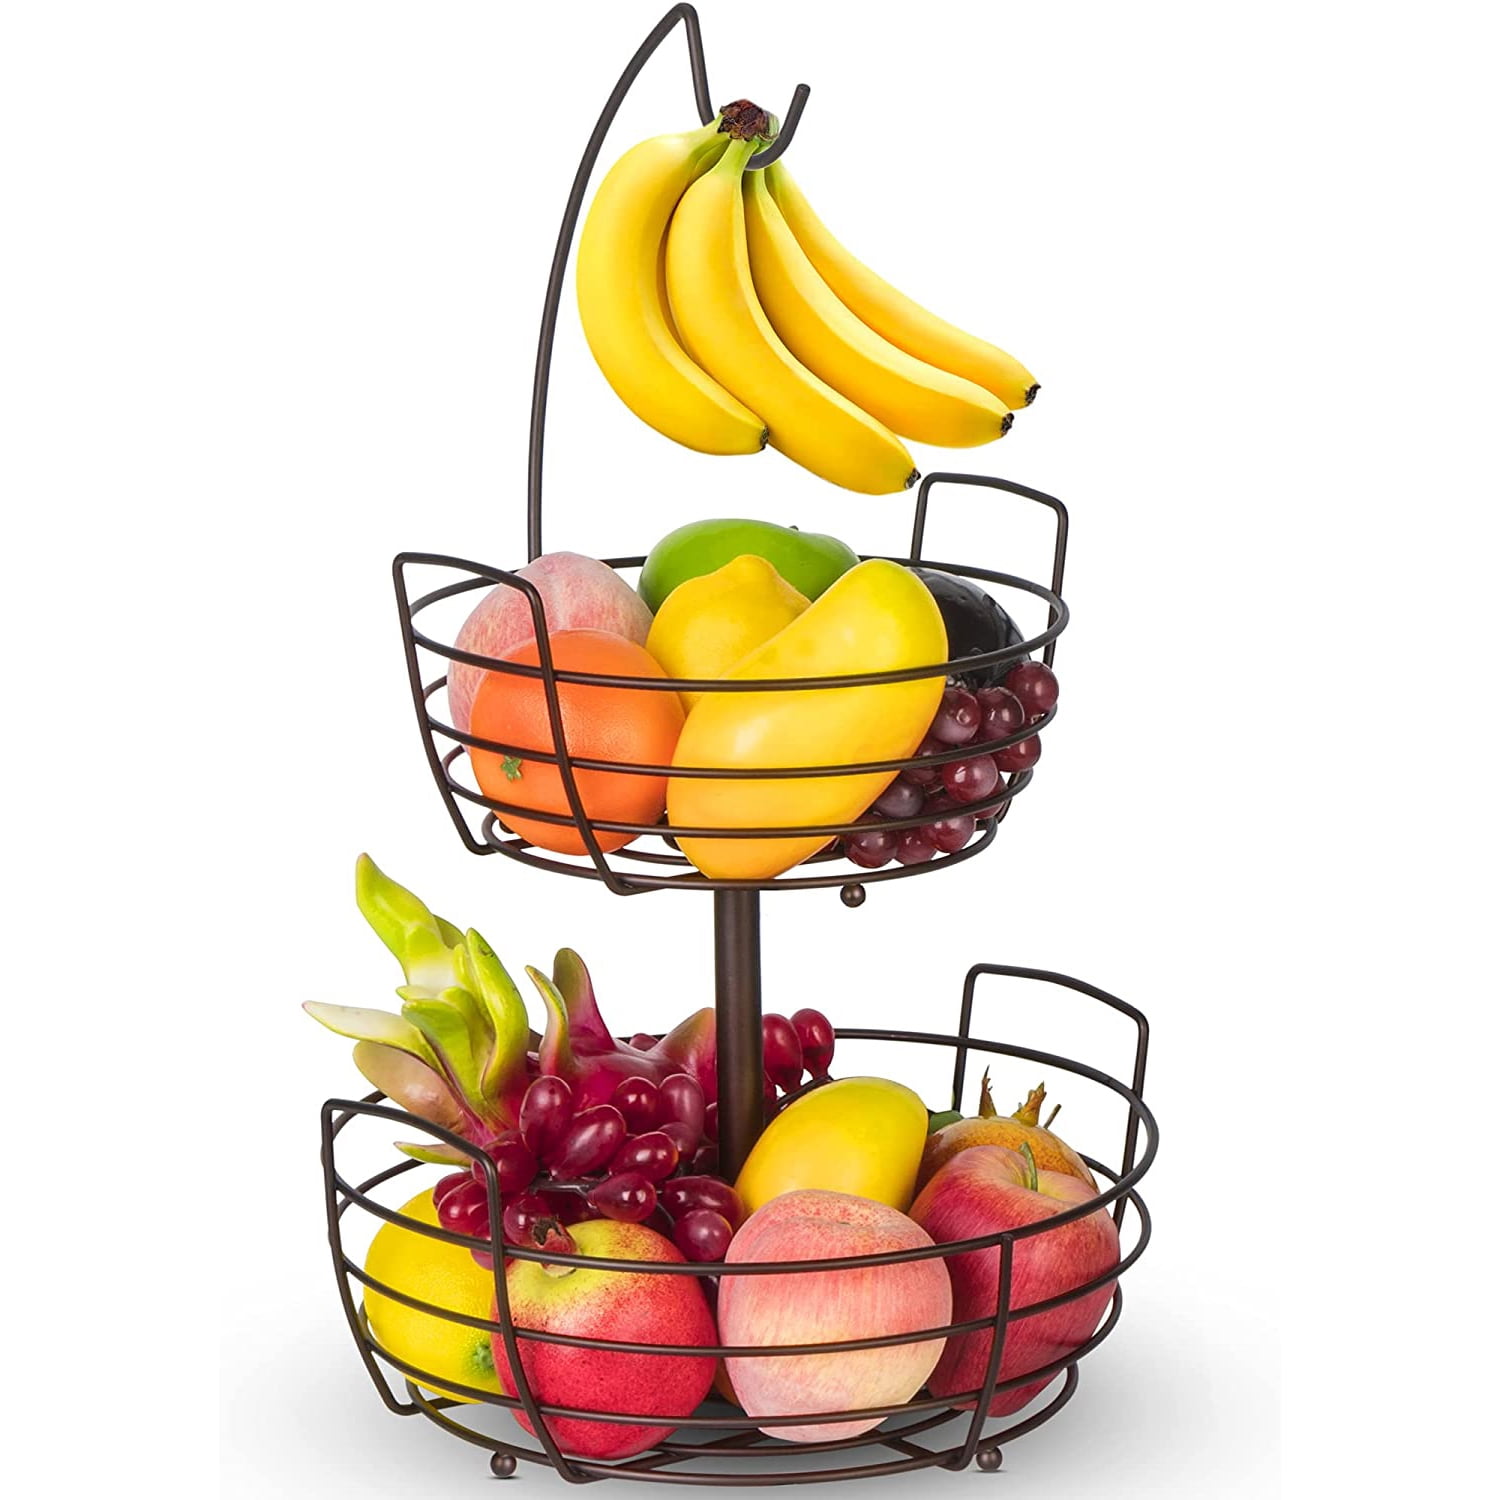 Fruit Vegetables Storage Stand Metal Fruit Bowls For The kitchen Countertop Black Voency 3-Tier Fruit Basket Fruit Bowl Holder Rack For Kitchen Storing & Organizing